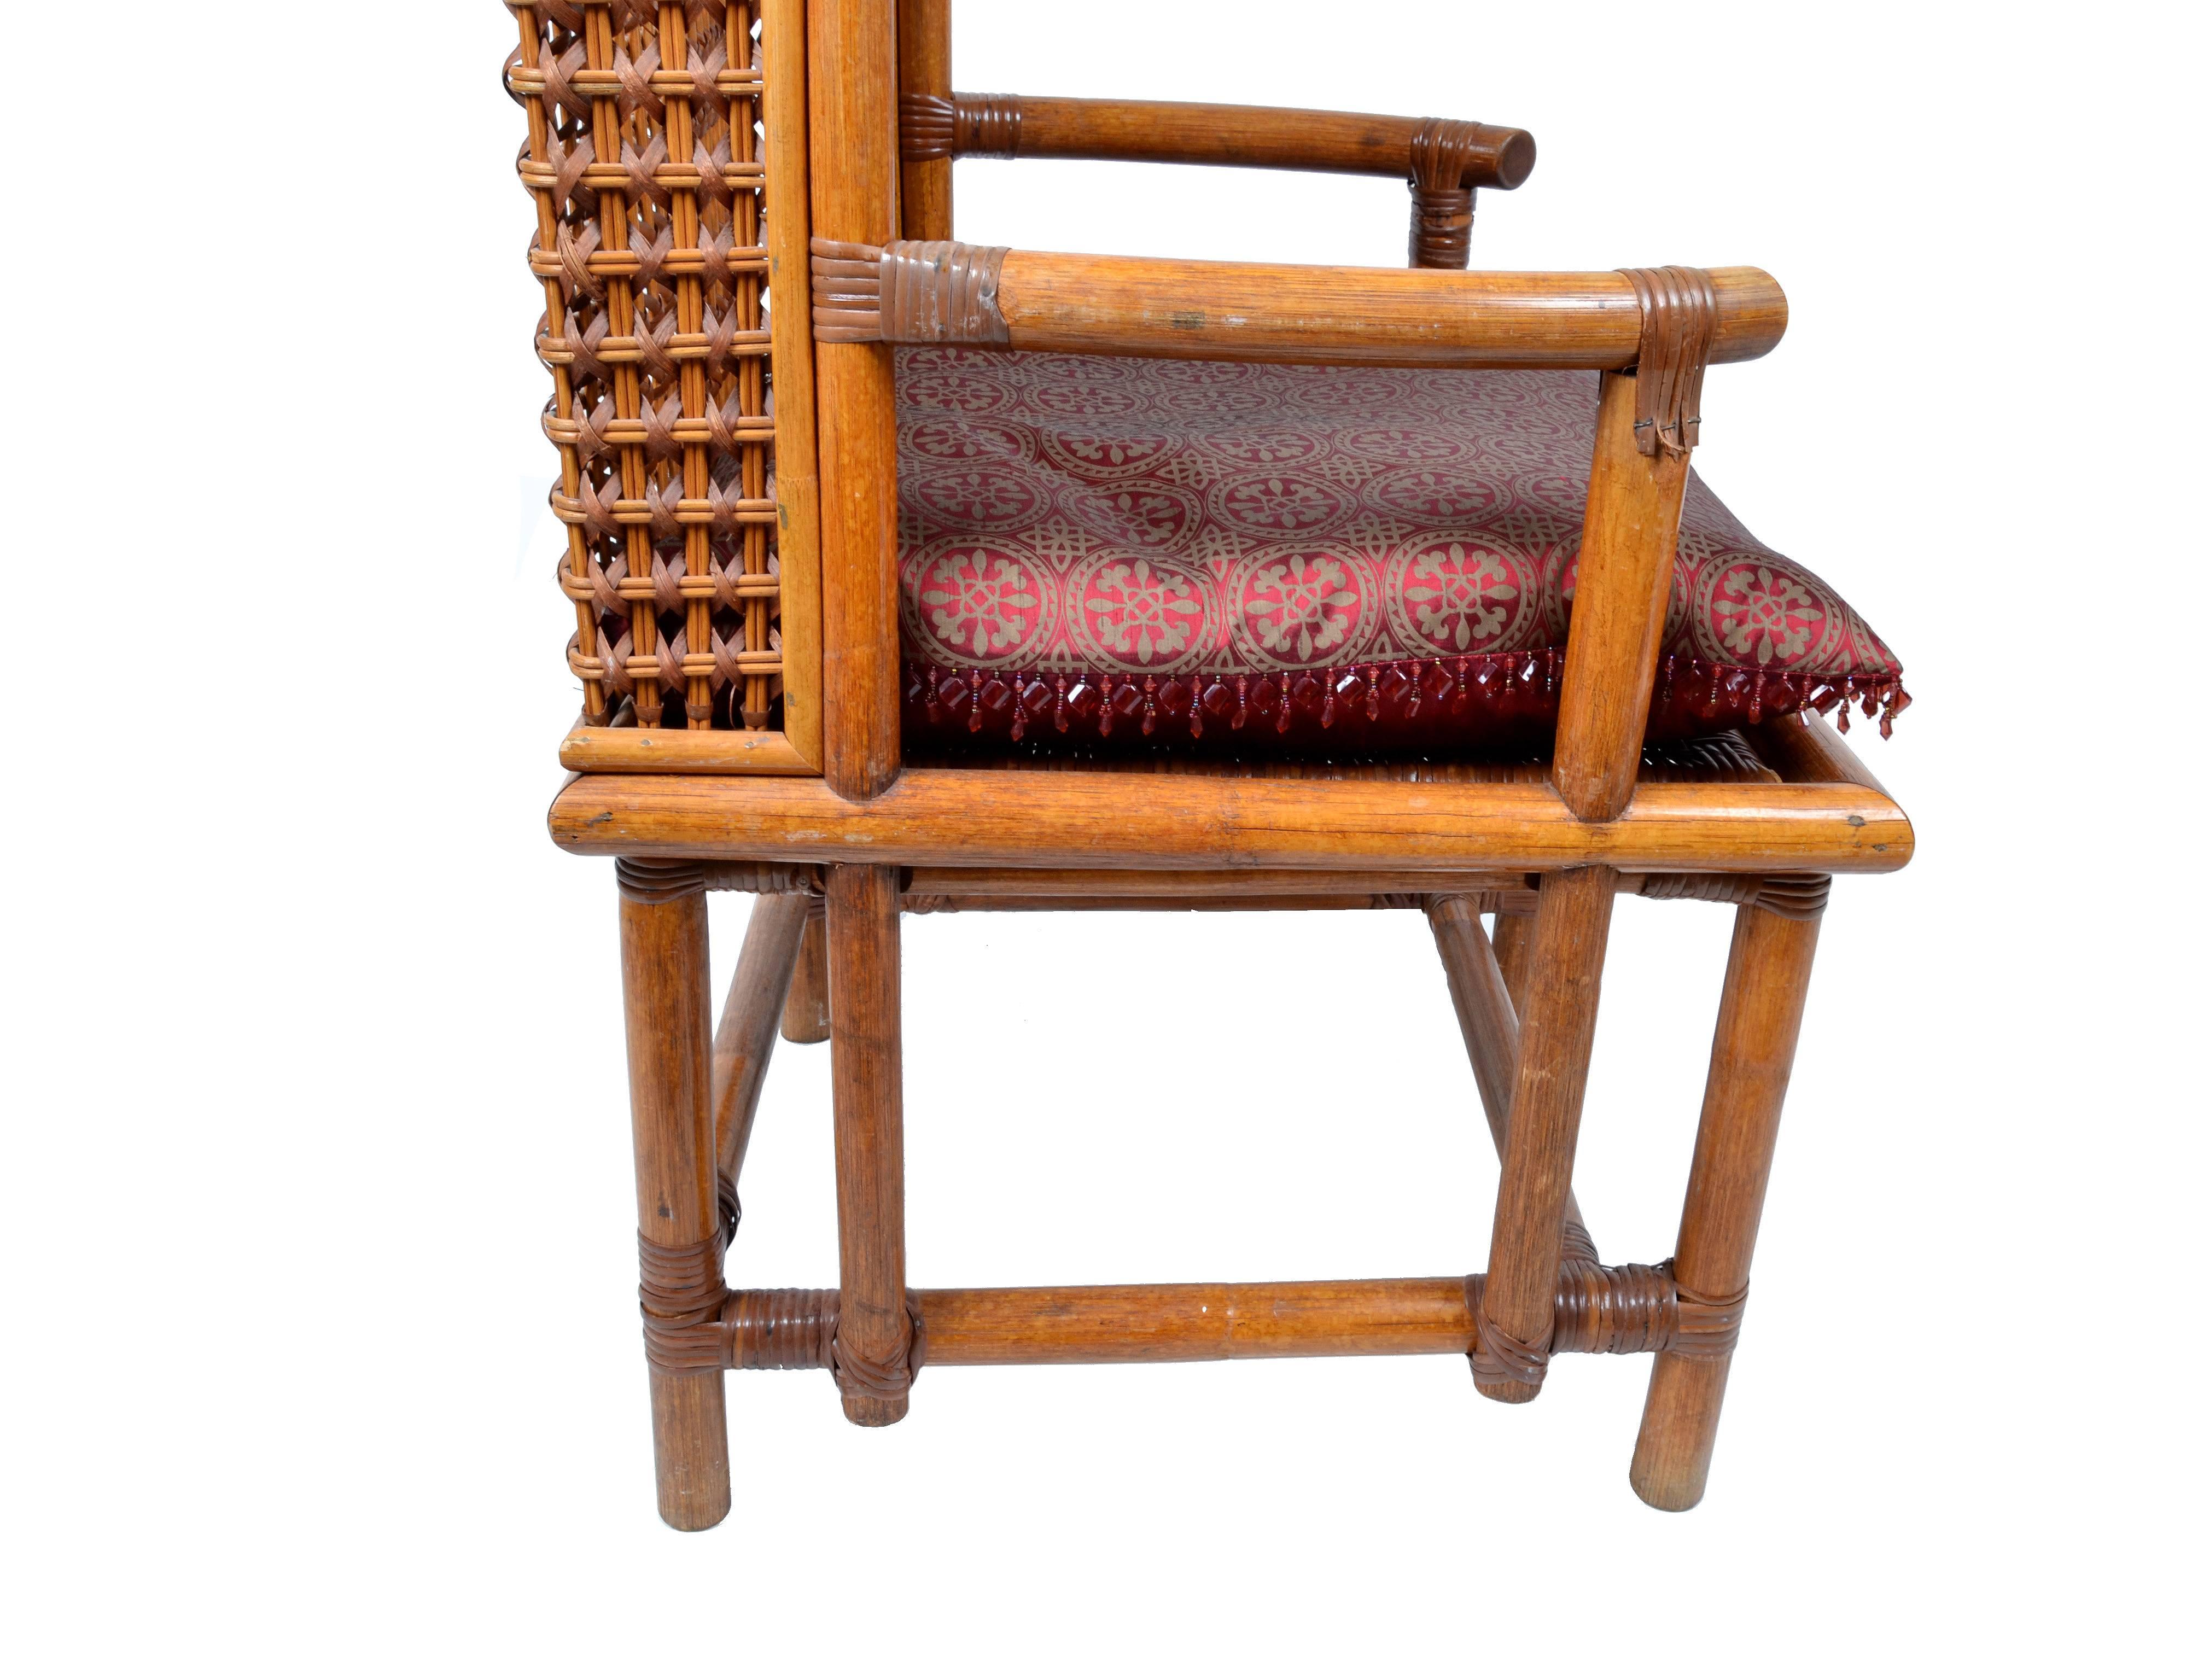 Hong Kong Vintage Bamboo and Cane Chinese Chinoiserie Style High Back Chair